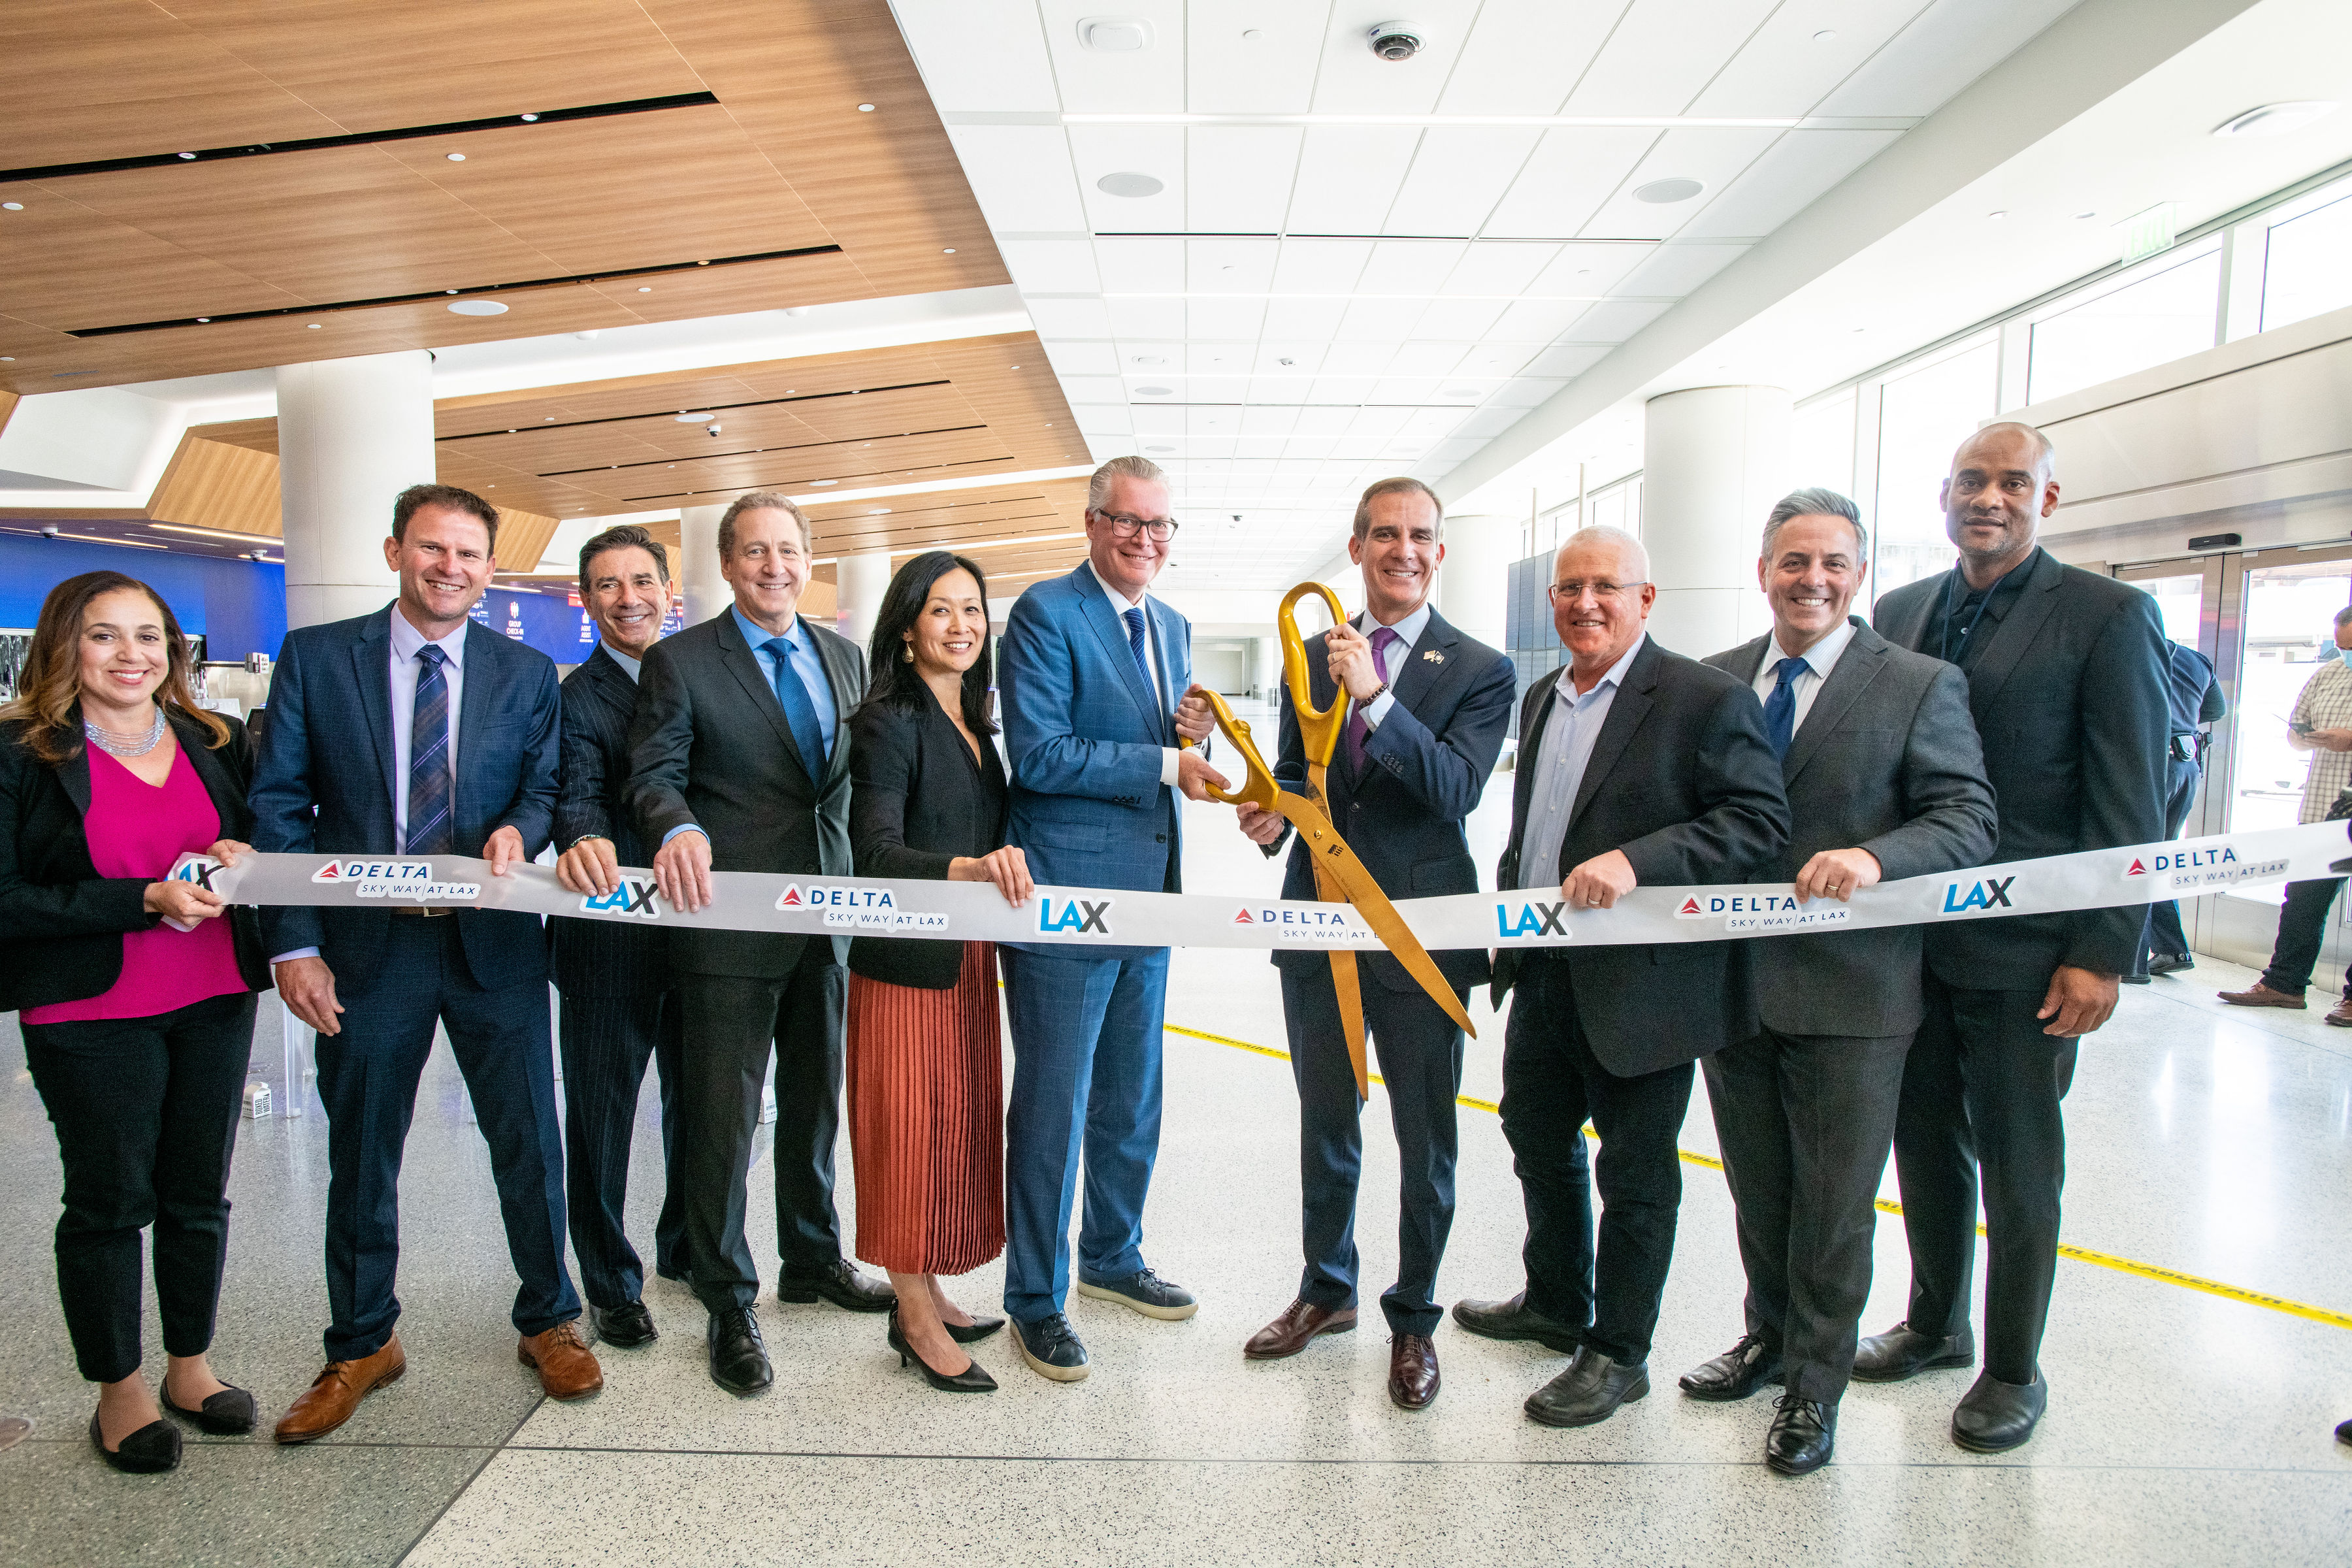 The ribbon cutting ceremony at LAX on March 29, 2022.